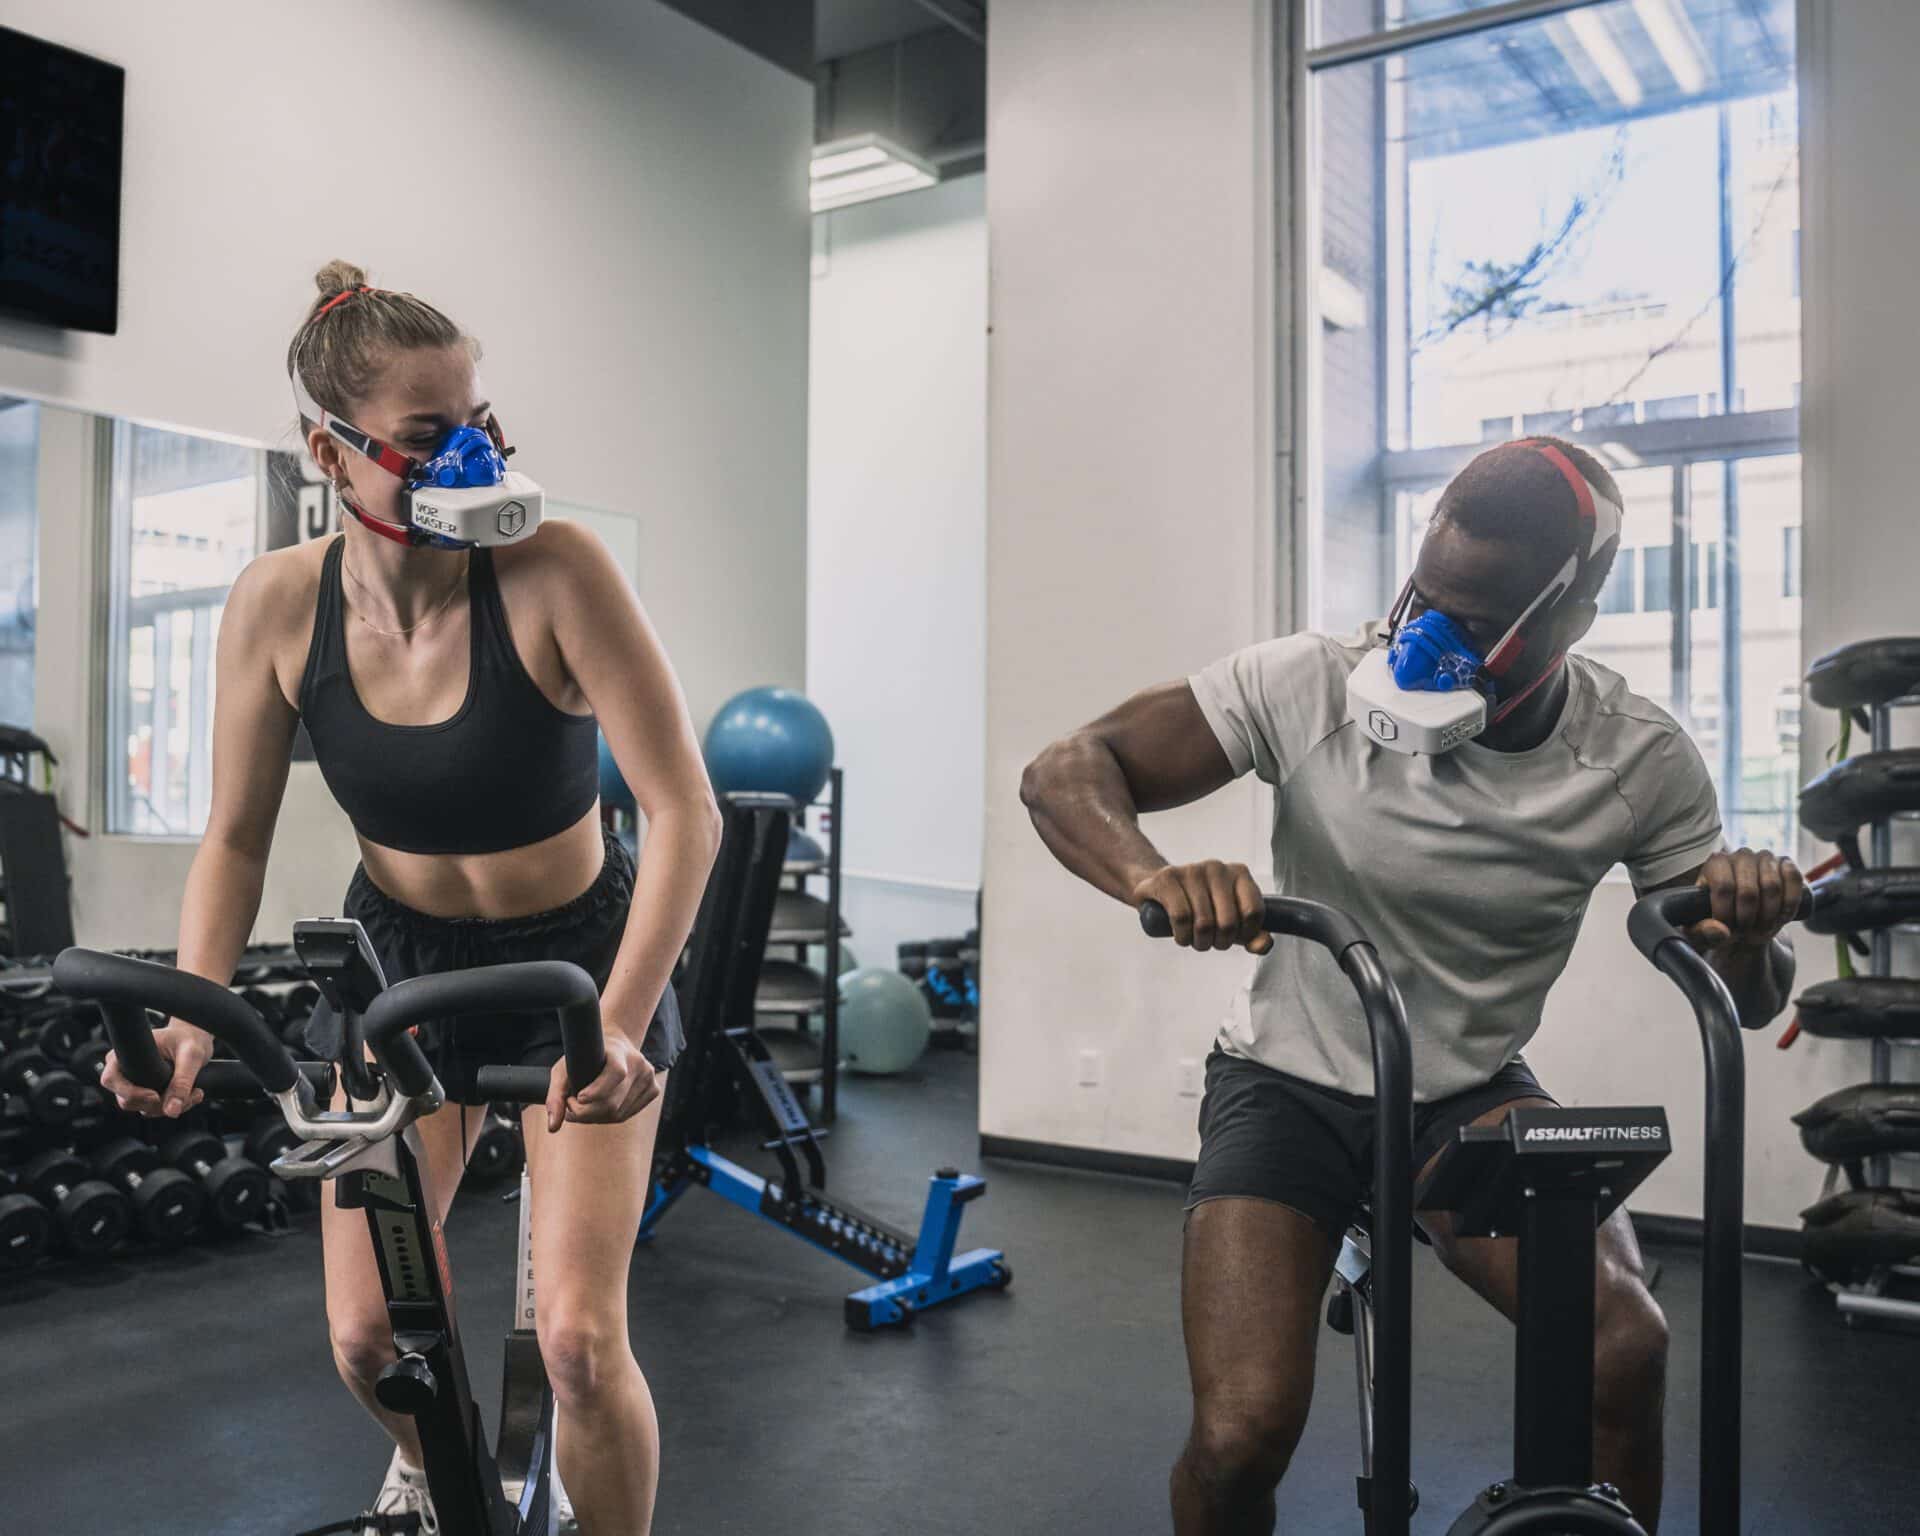 Athletes on indoor elliptical and bike, monitoring VT zones and performance data